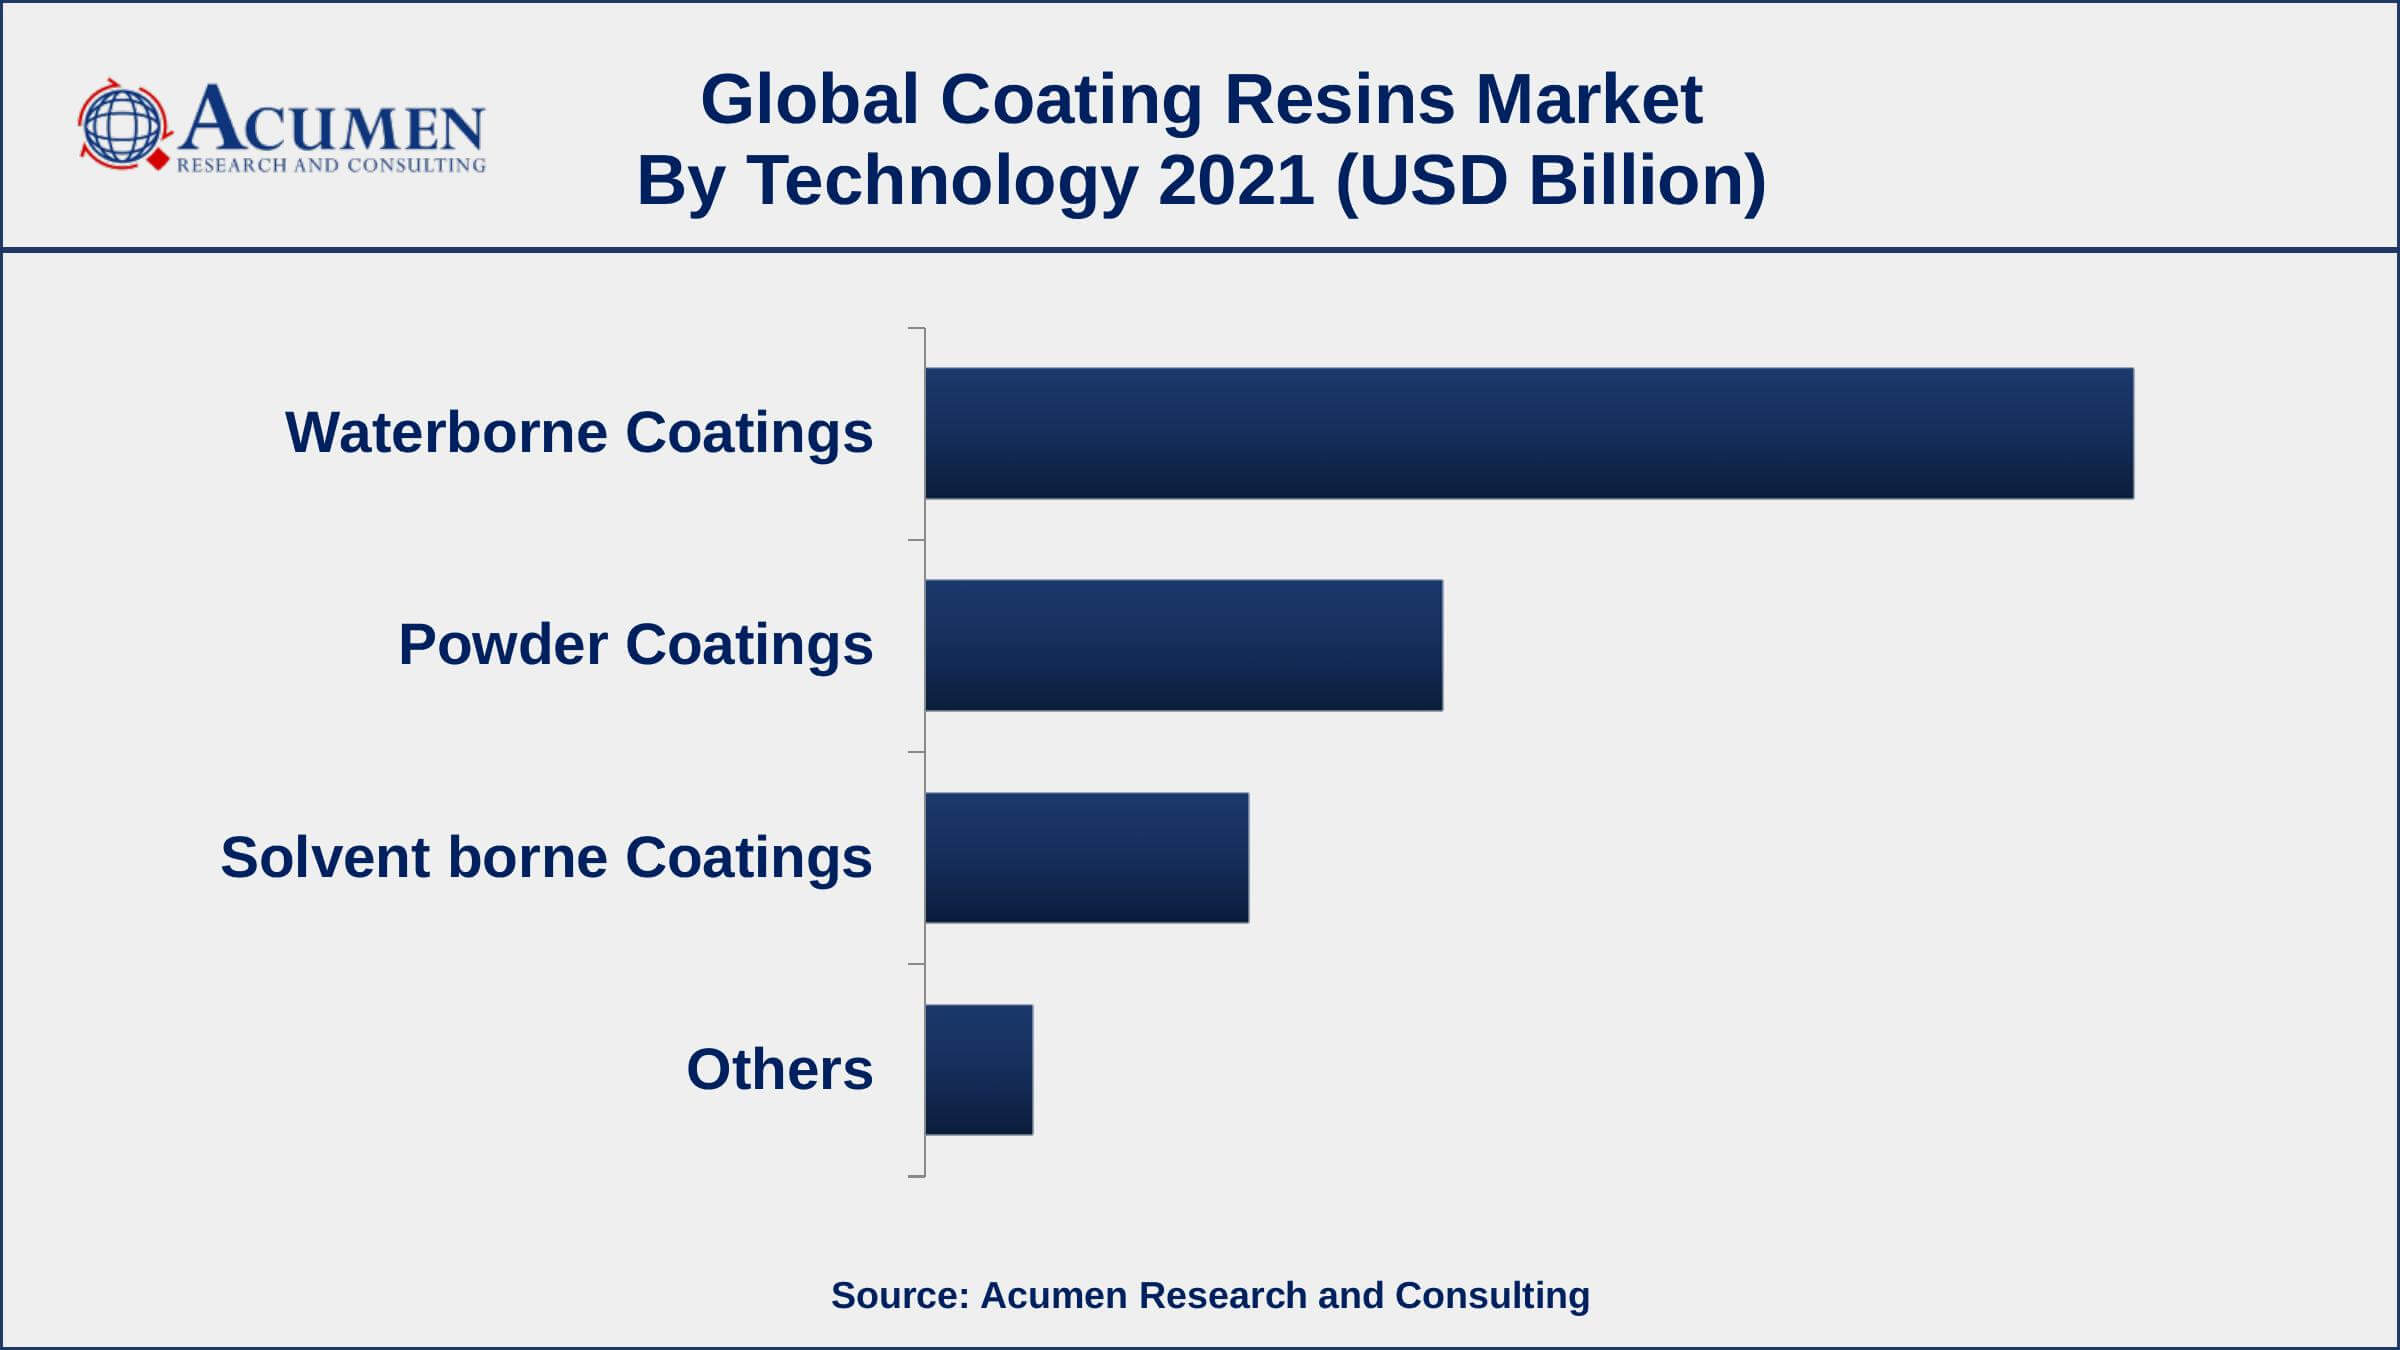 By technology, waterborne coatings segment engaged more than 56% of the total market share in 2021